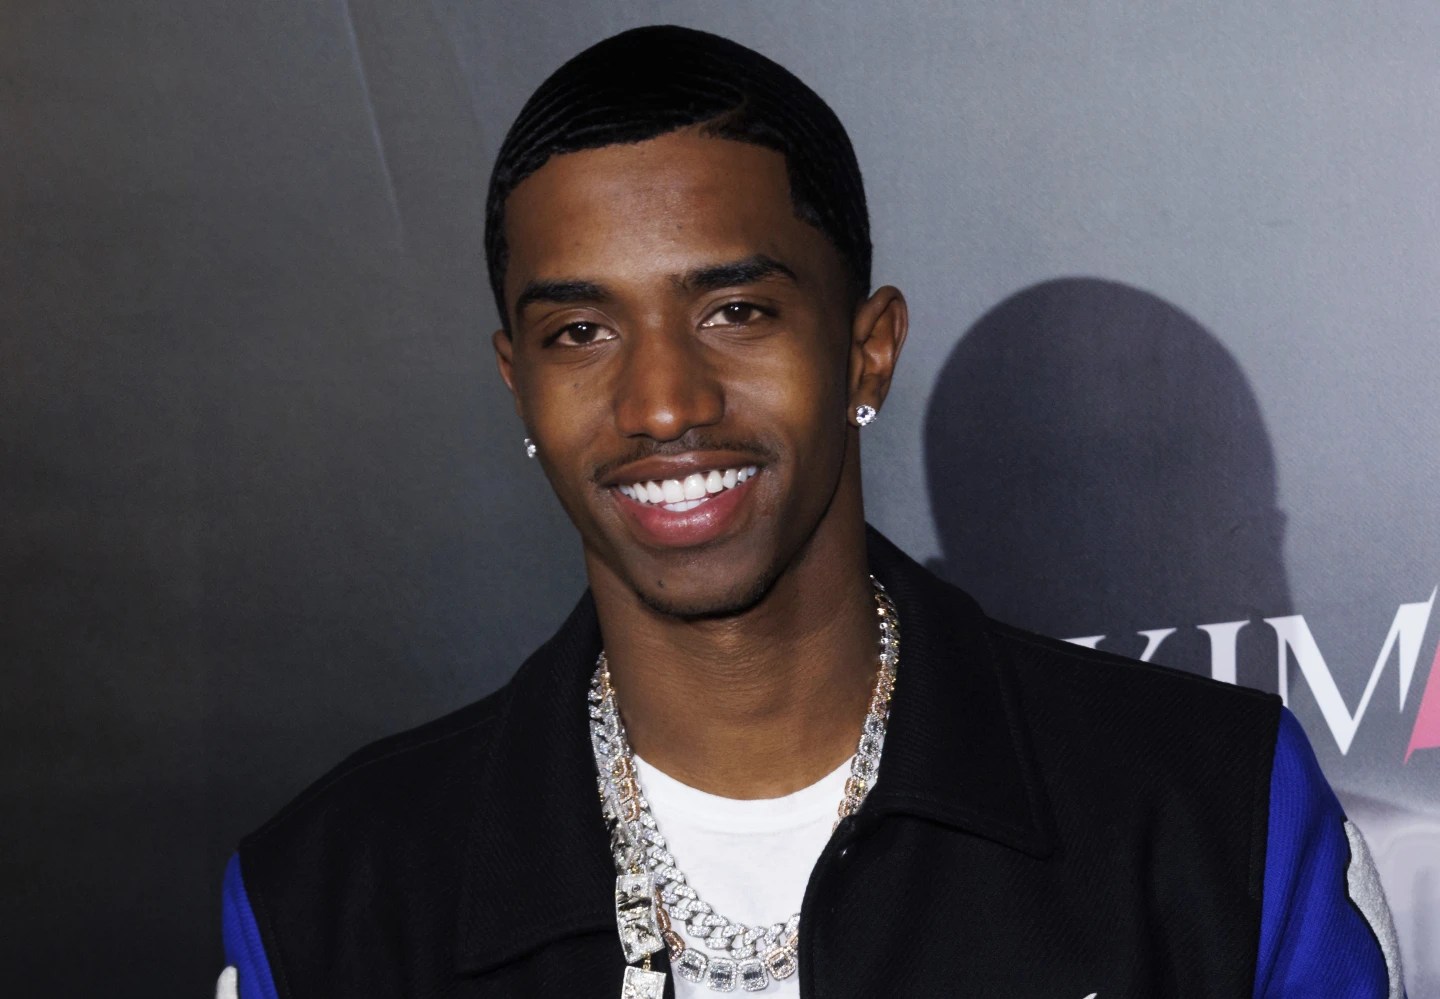 Christian Combs accused in lawsuit of sexually assaulting woman on yacht